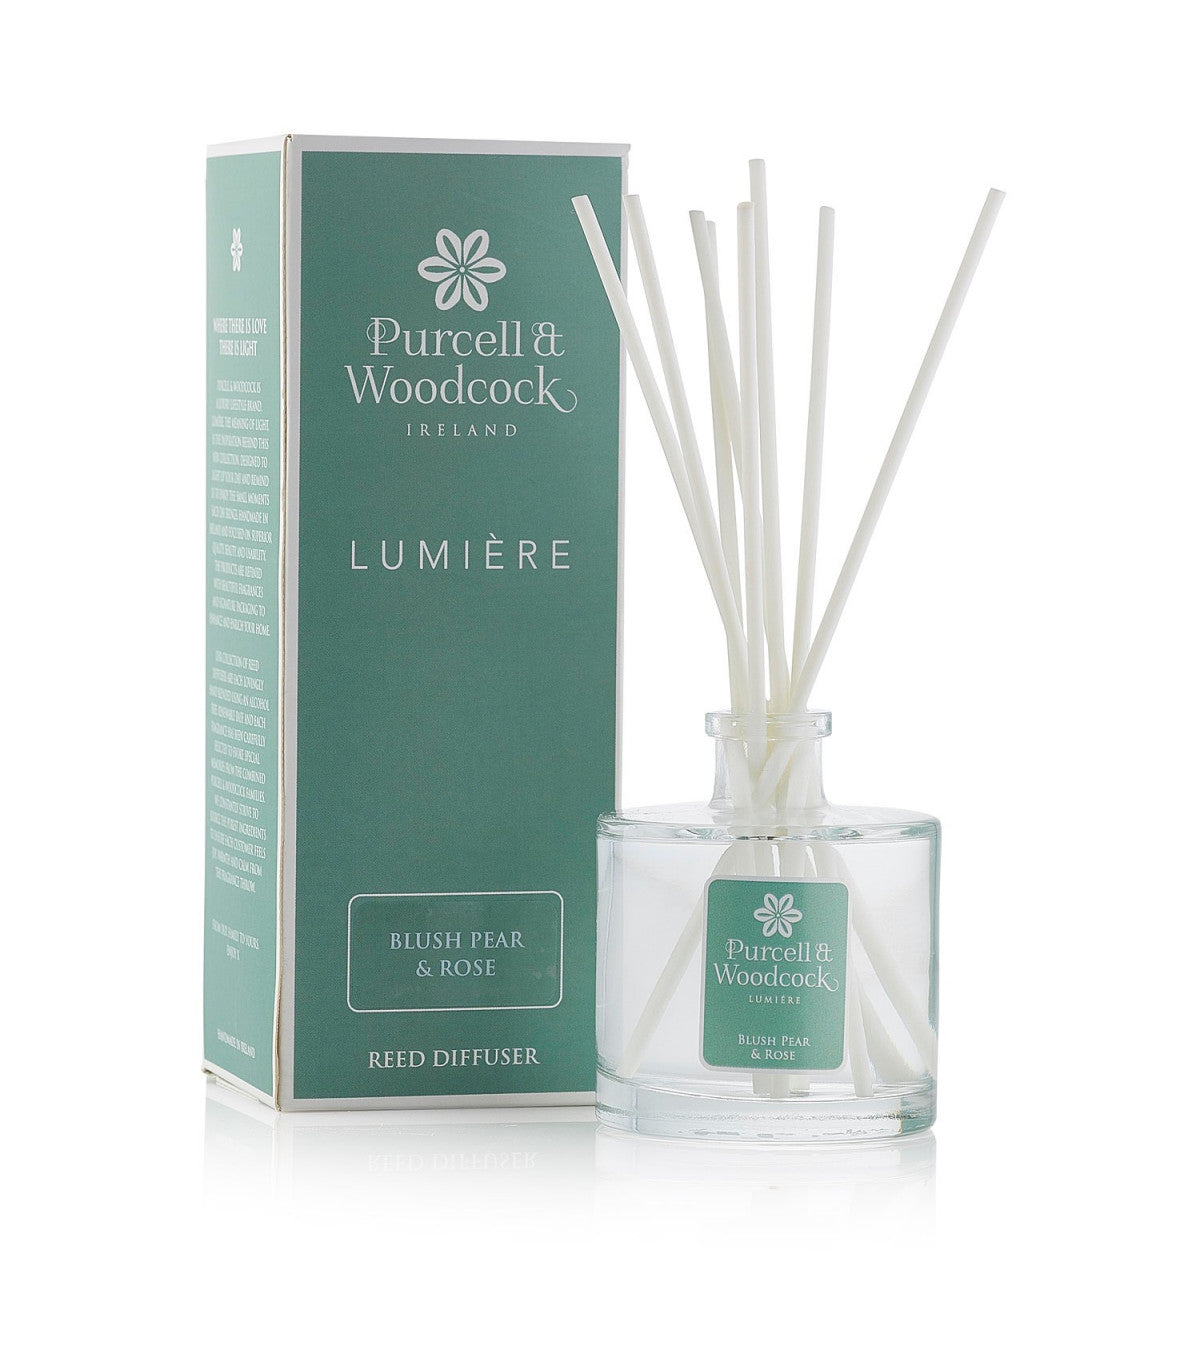 Purcell & Woodcock Blush Pear & Rose Luxury Scented Diffuser